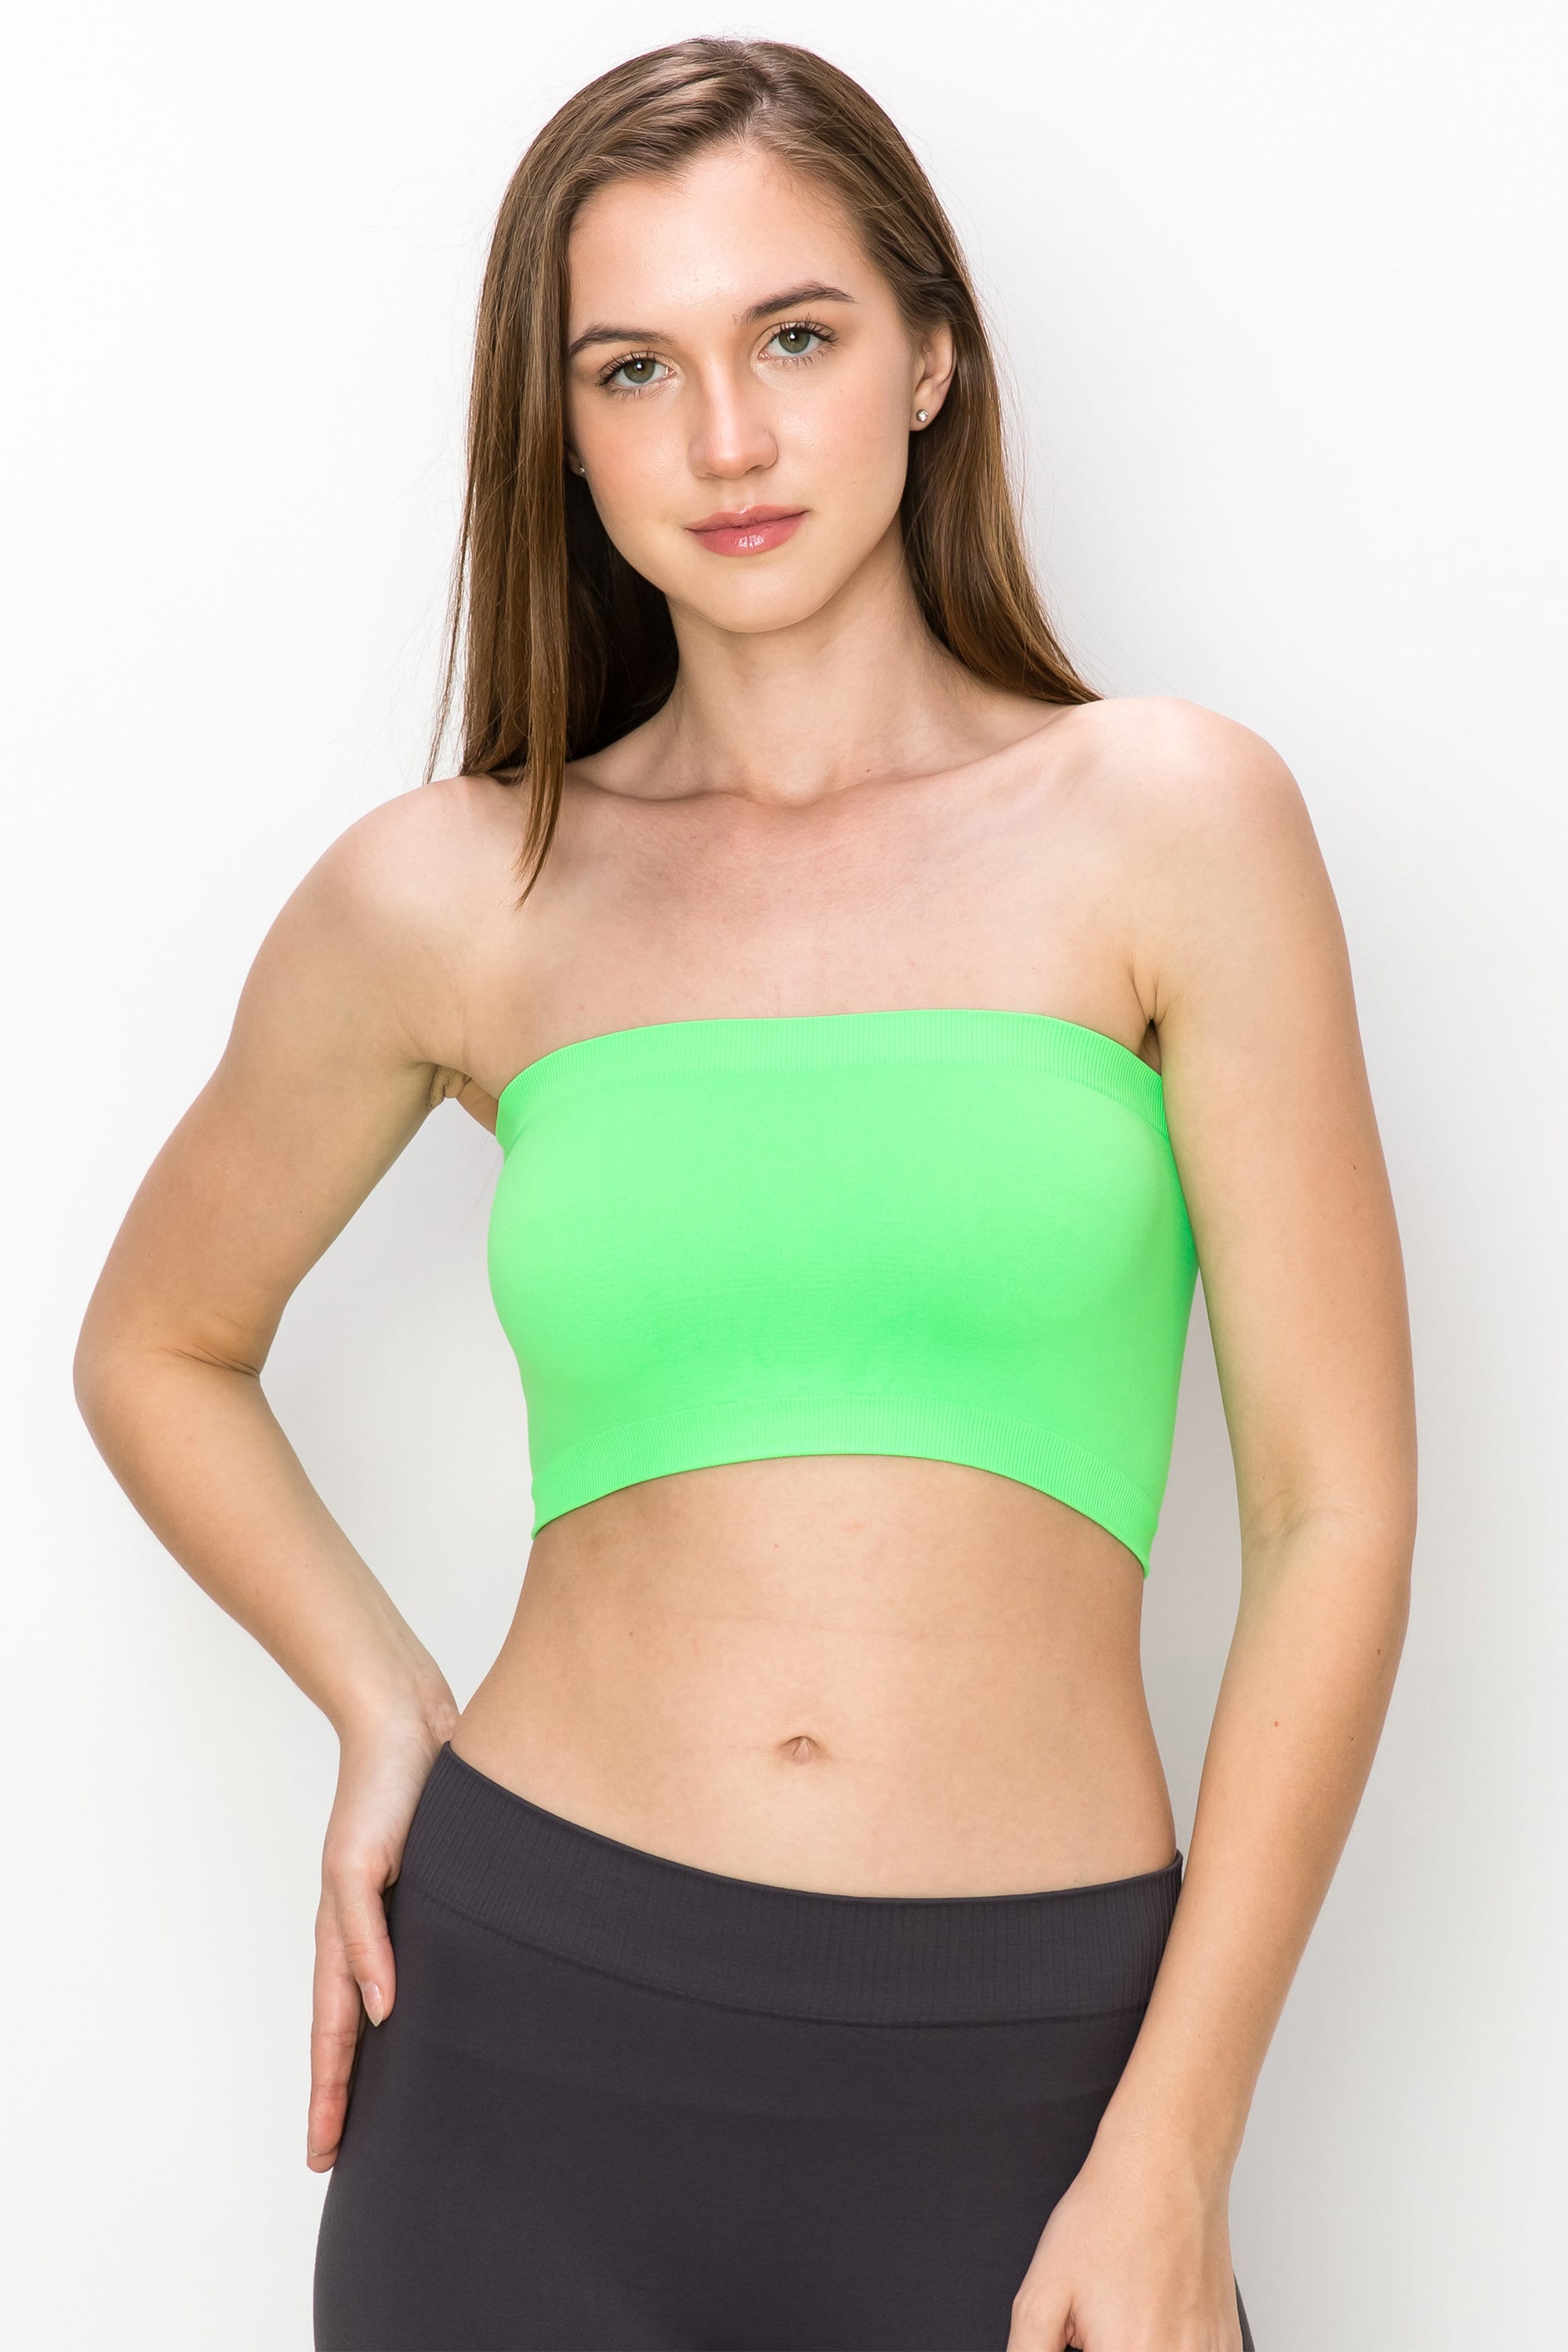 Kurve Premium Seamless Bandeau Tube Top non-padded made in USA 